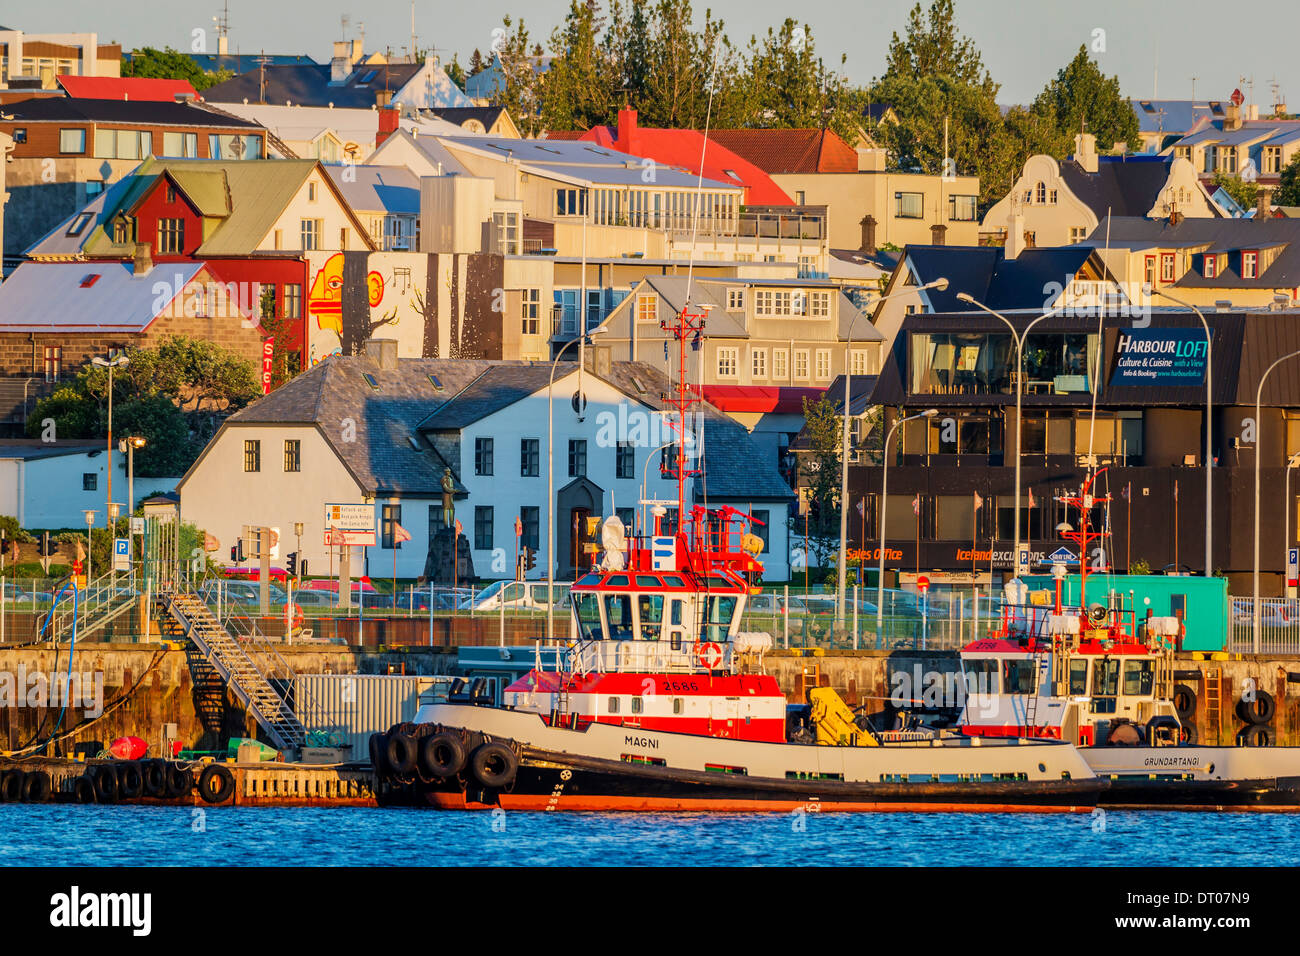 Fishing trawler with buildings in the background, Reykjavik Iceland. Stock Photo